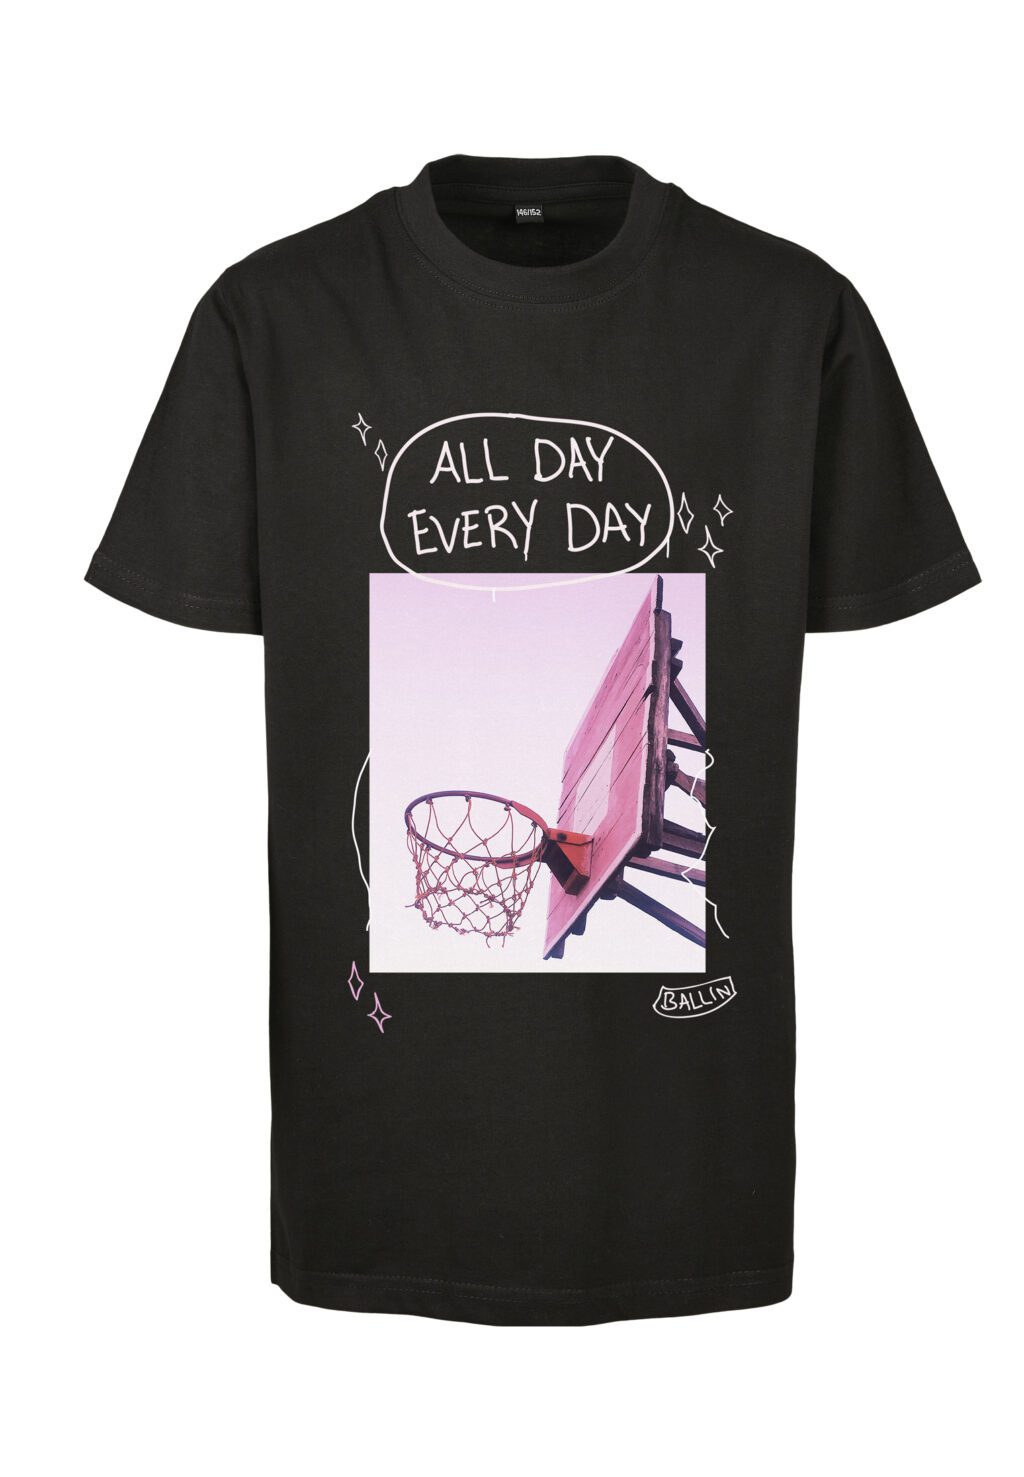 Kids All Day Every Day Pink Tee black MTK141